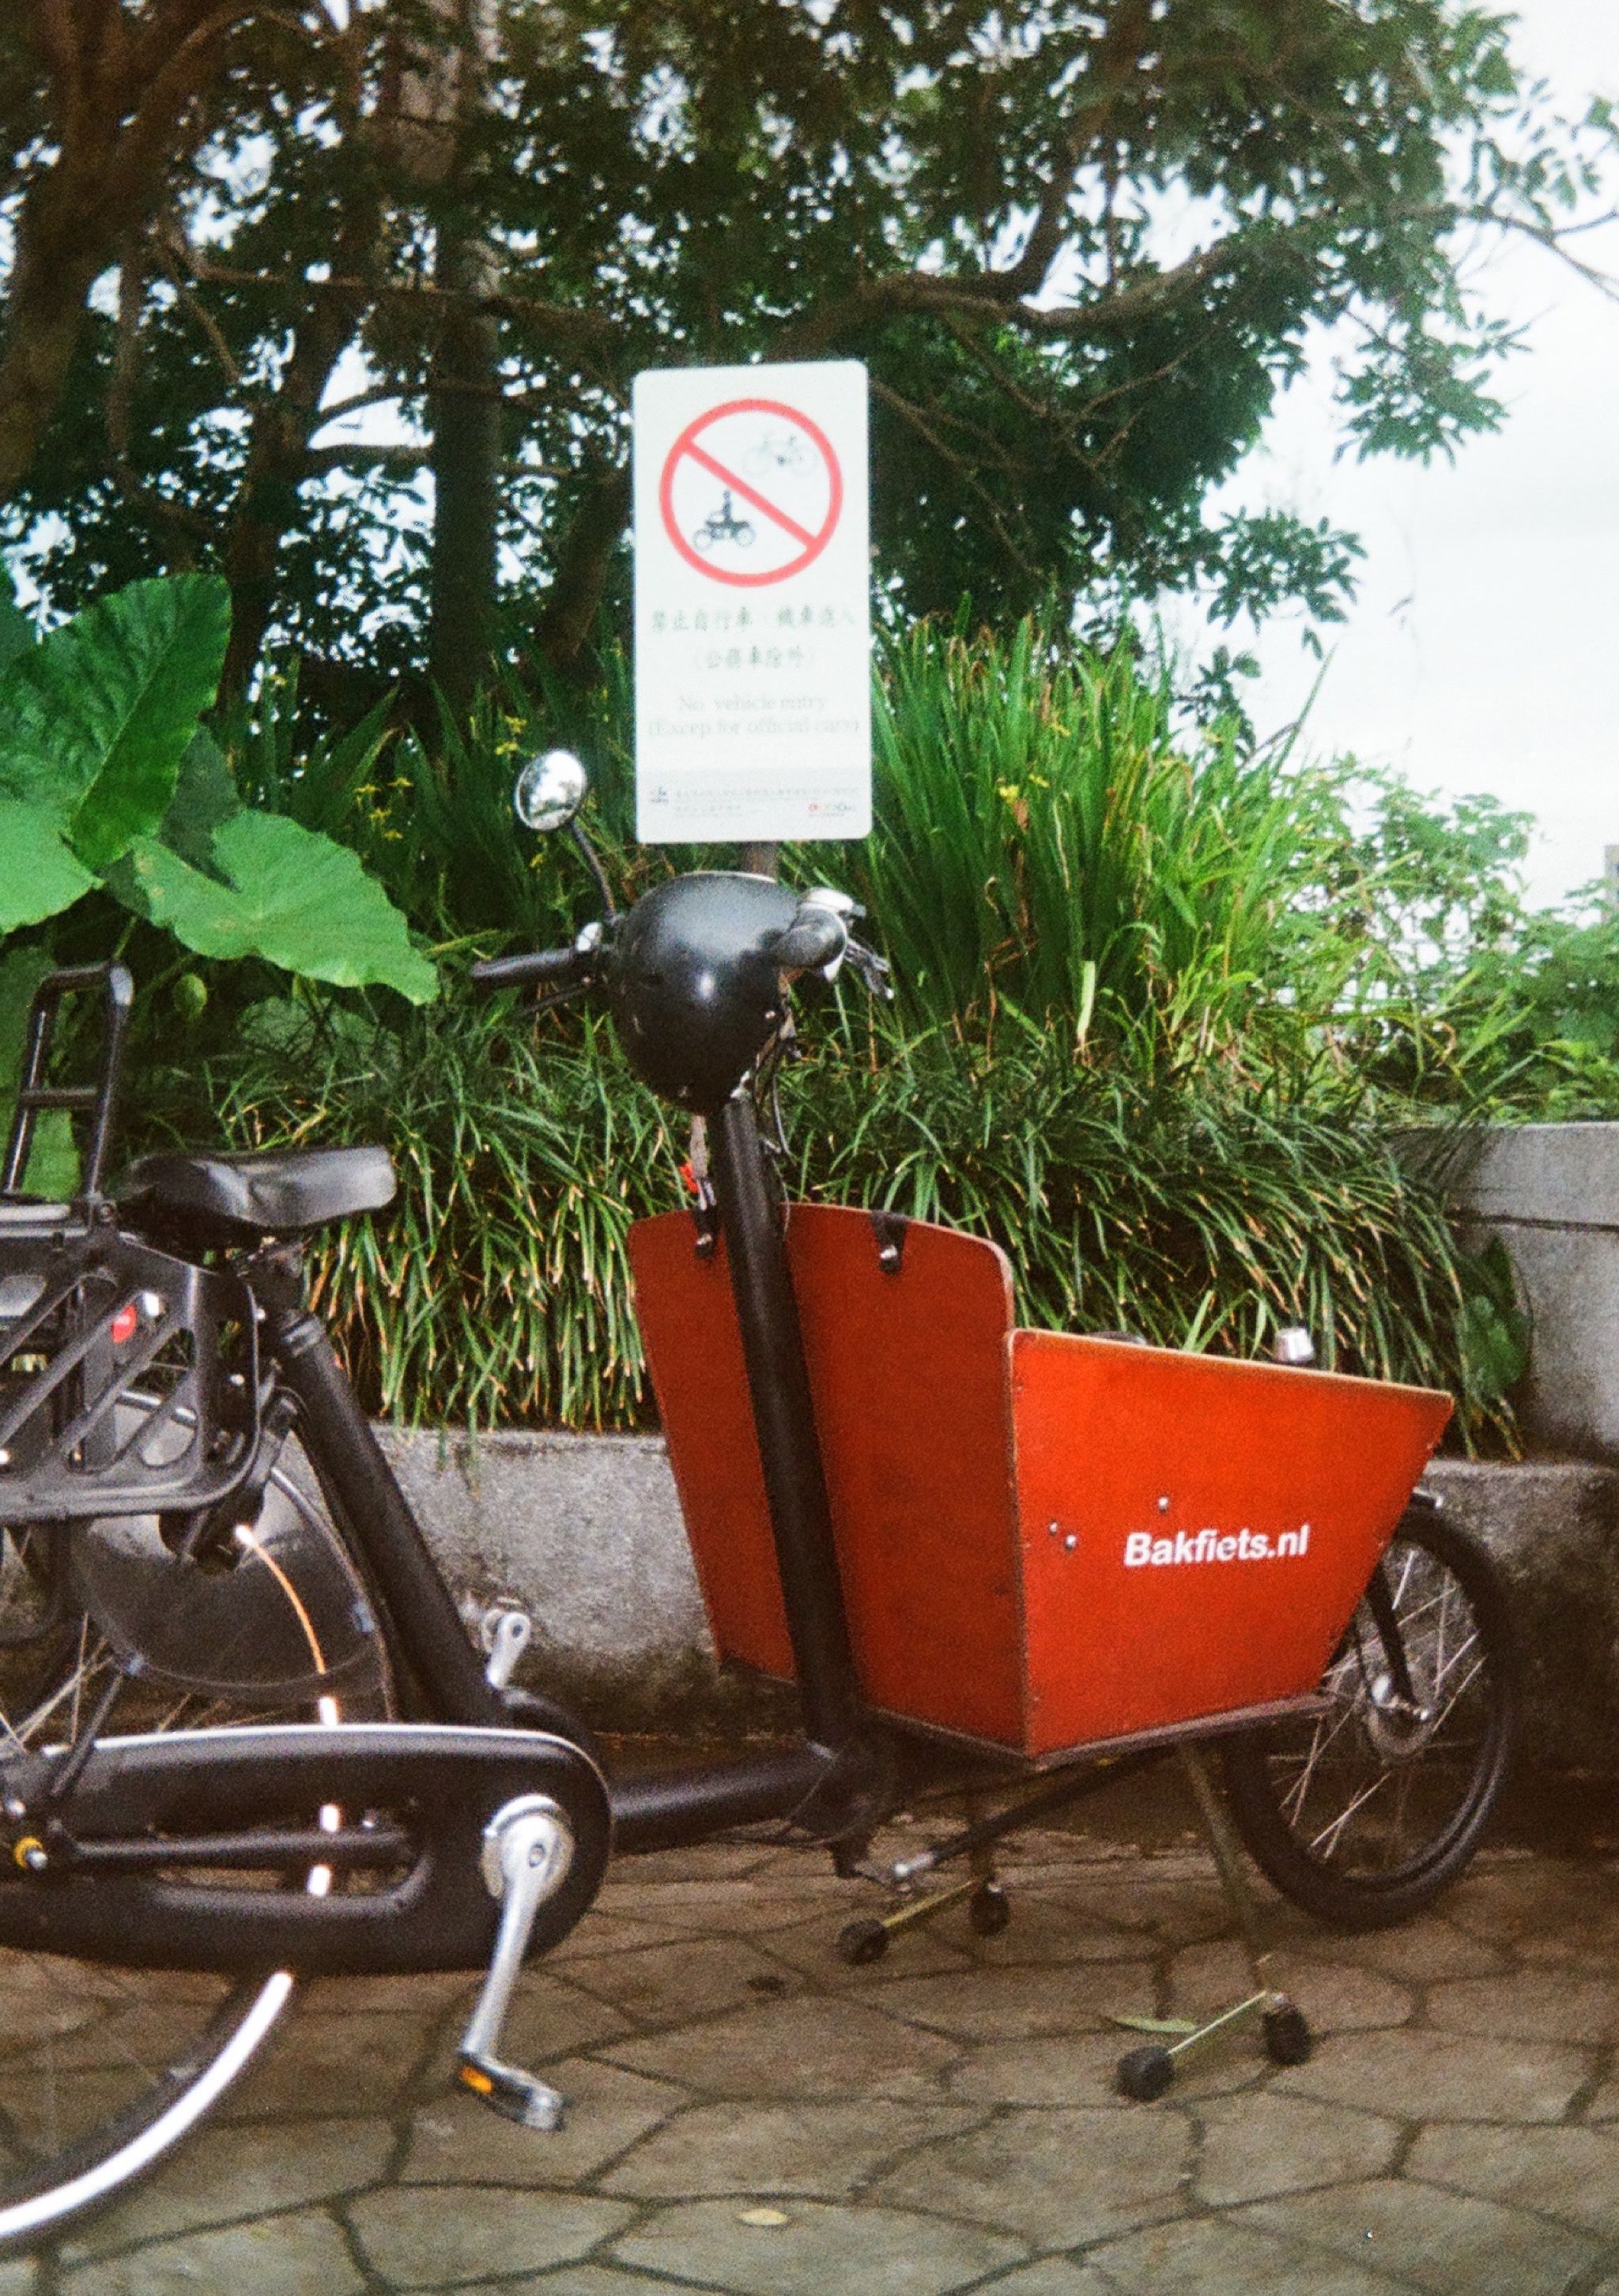 A parked cargo bike marked with Bakfiets.nl.